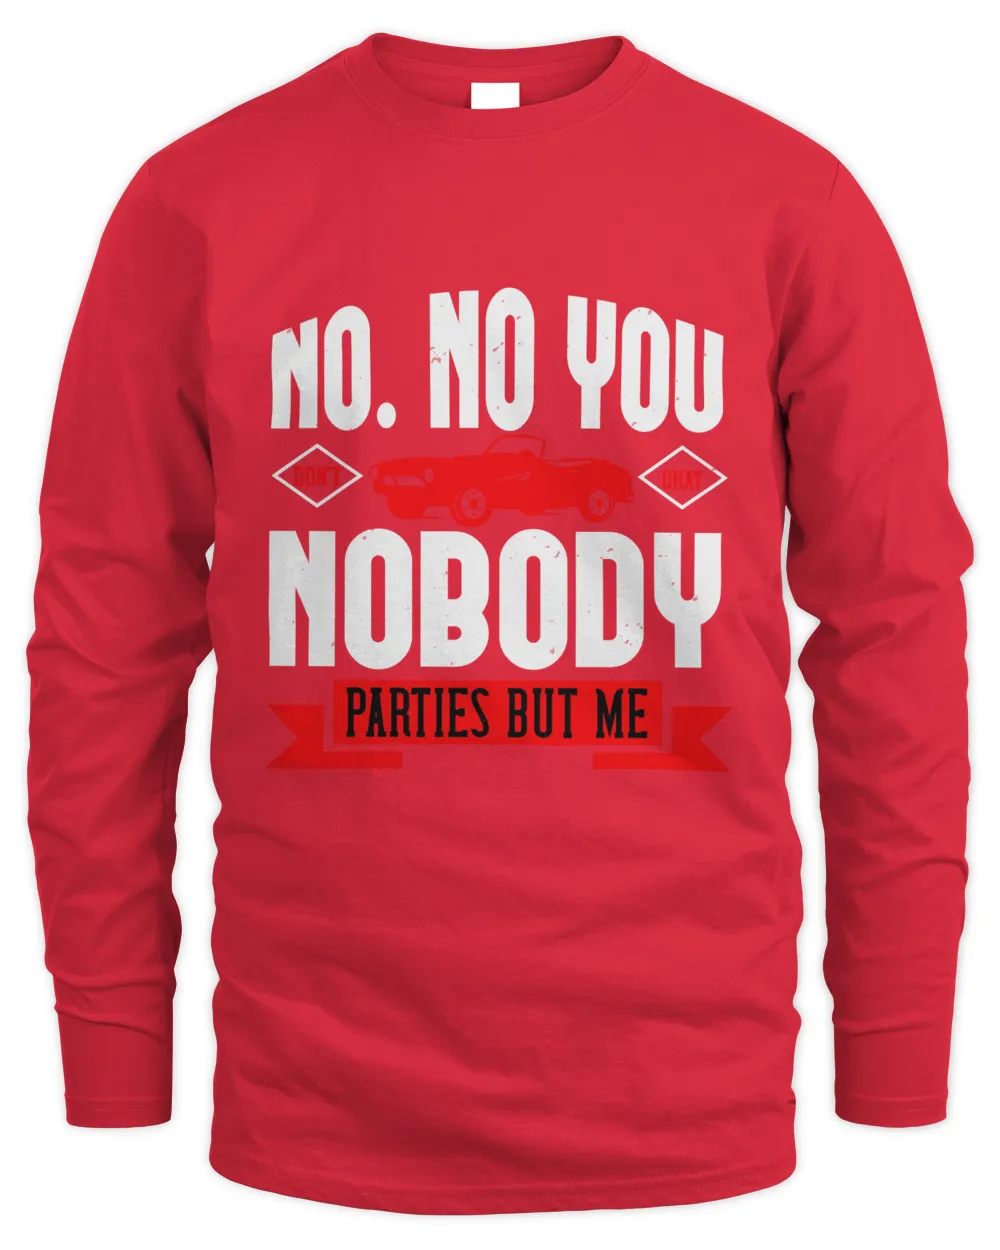 No. No you don't. Okay, nobody parties but me-01